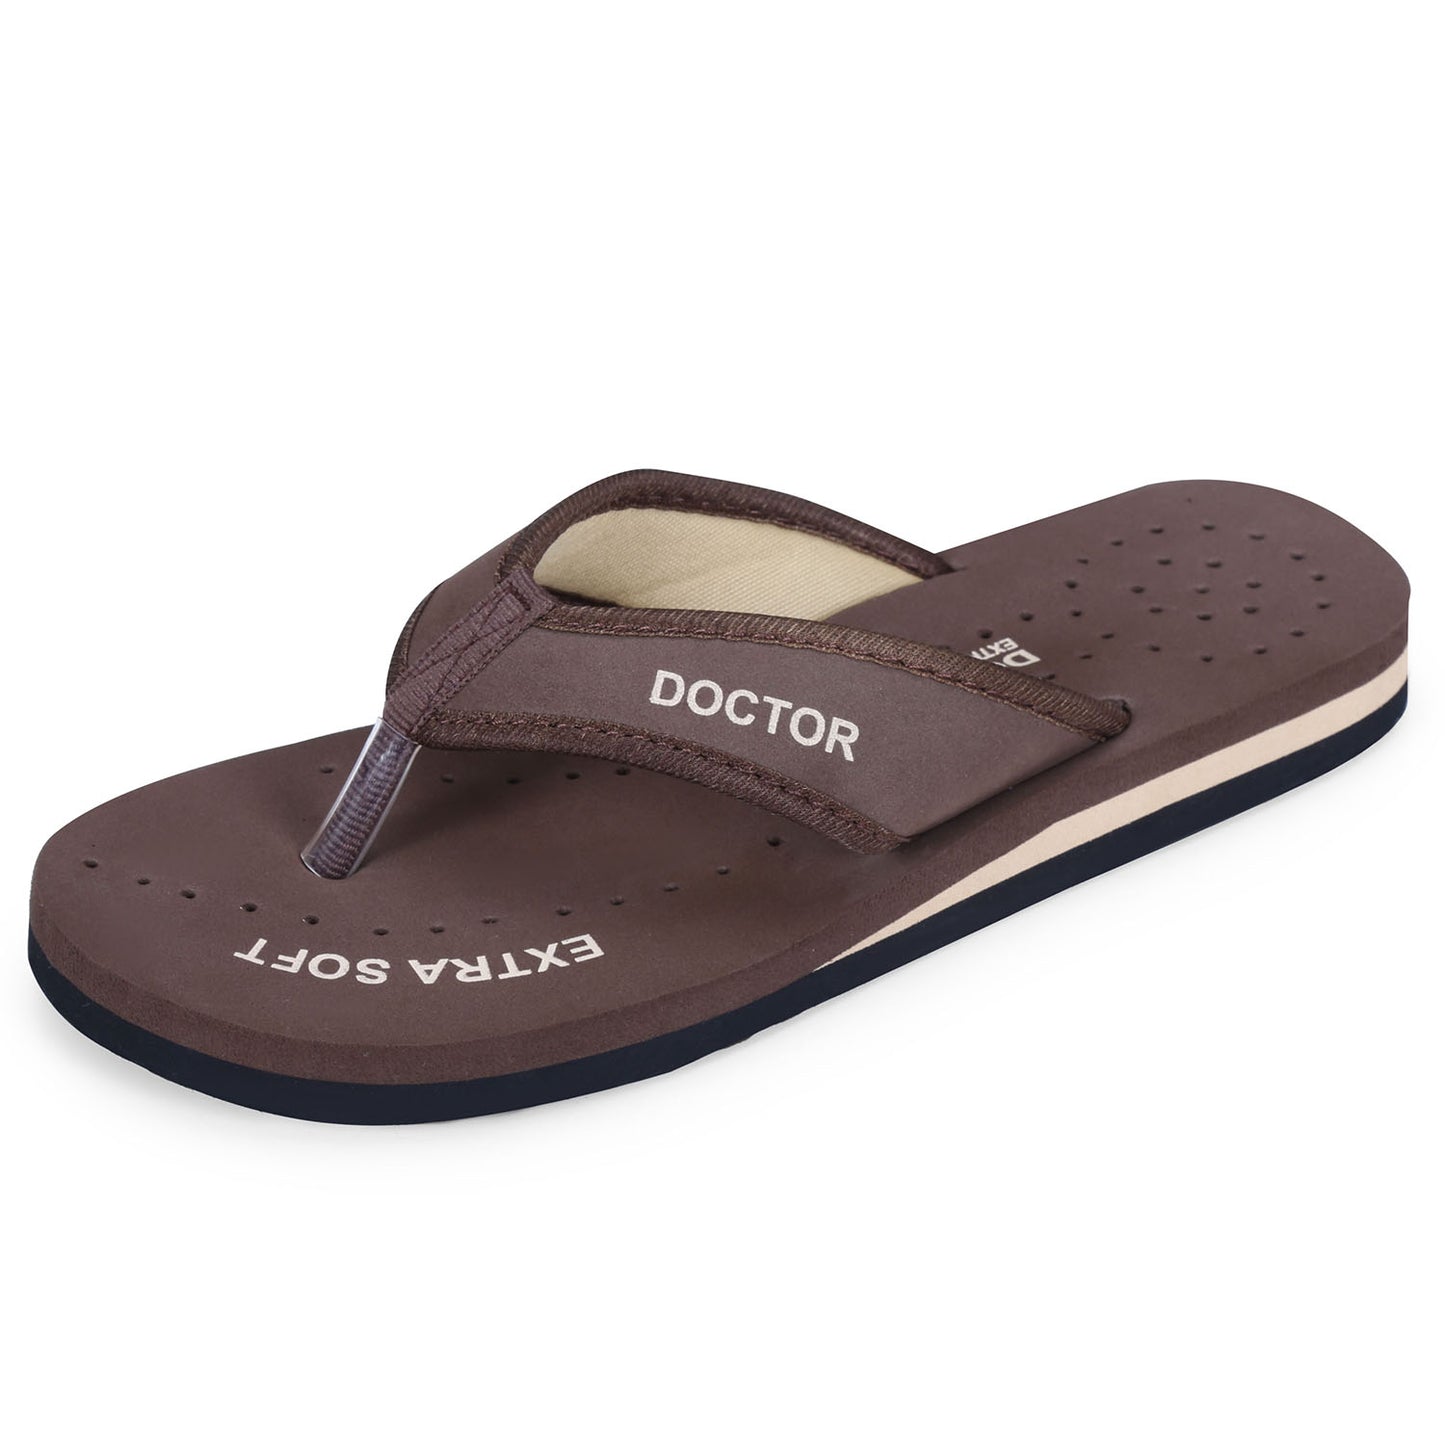 DOCTOR EXTRA SOFT D-22 Doctor Slippers for Women Orthopedic Diabetic Pregnancy Non Slip Lightweight Comfortable Flat Casual Stylish Dr Chappals & House Flip flops For Ladies & Girls